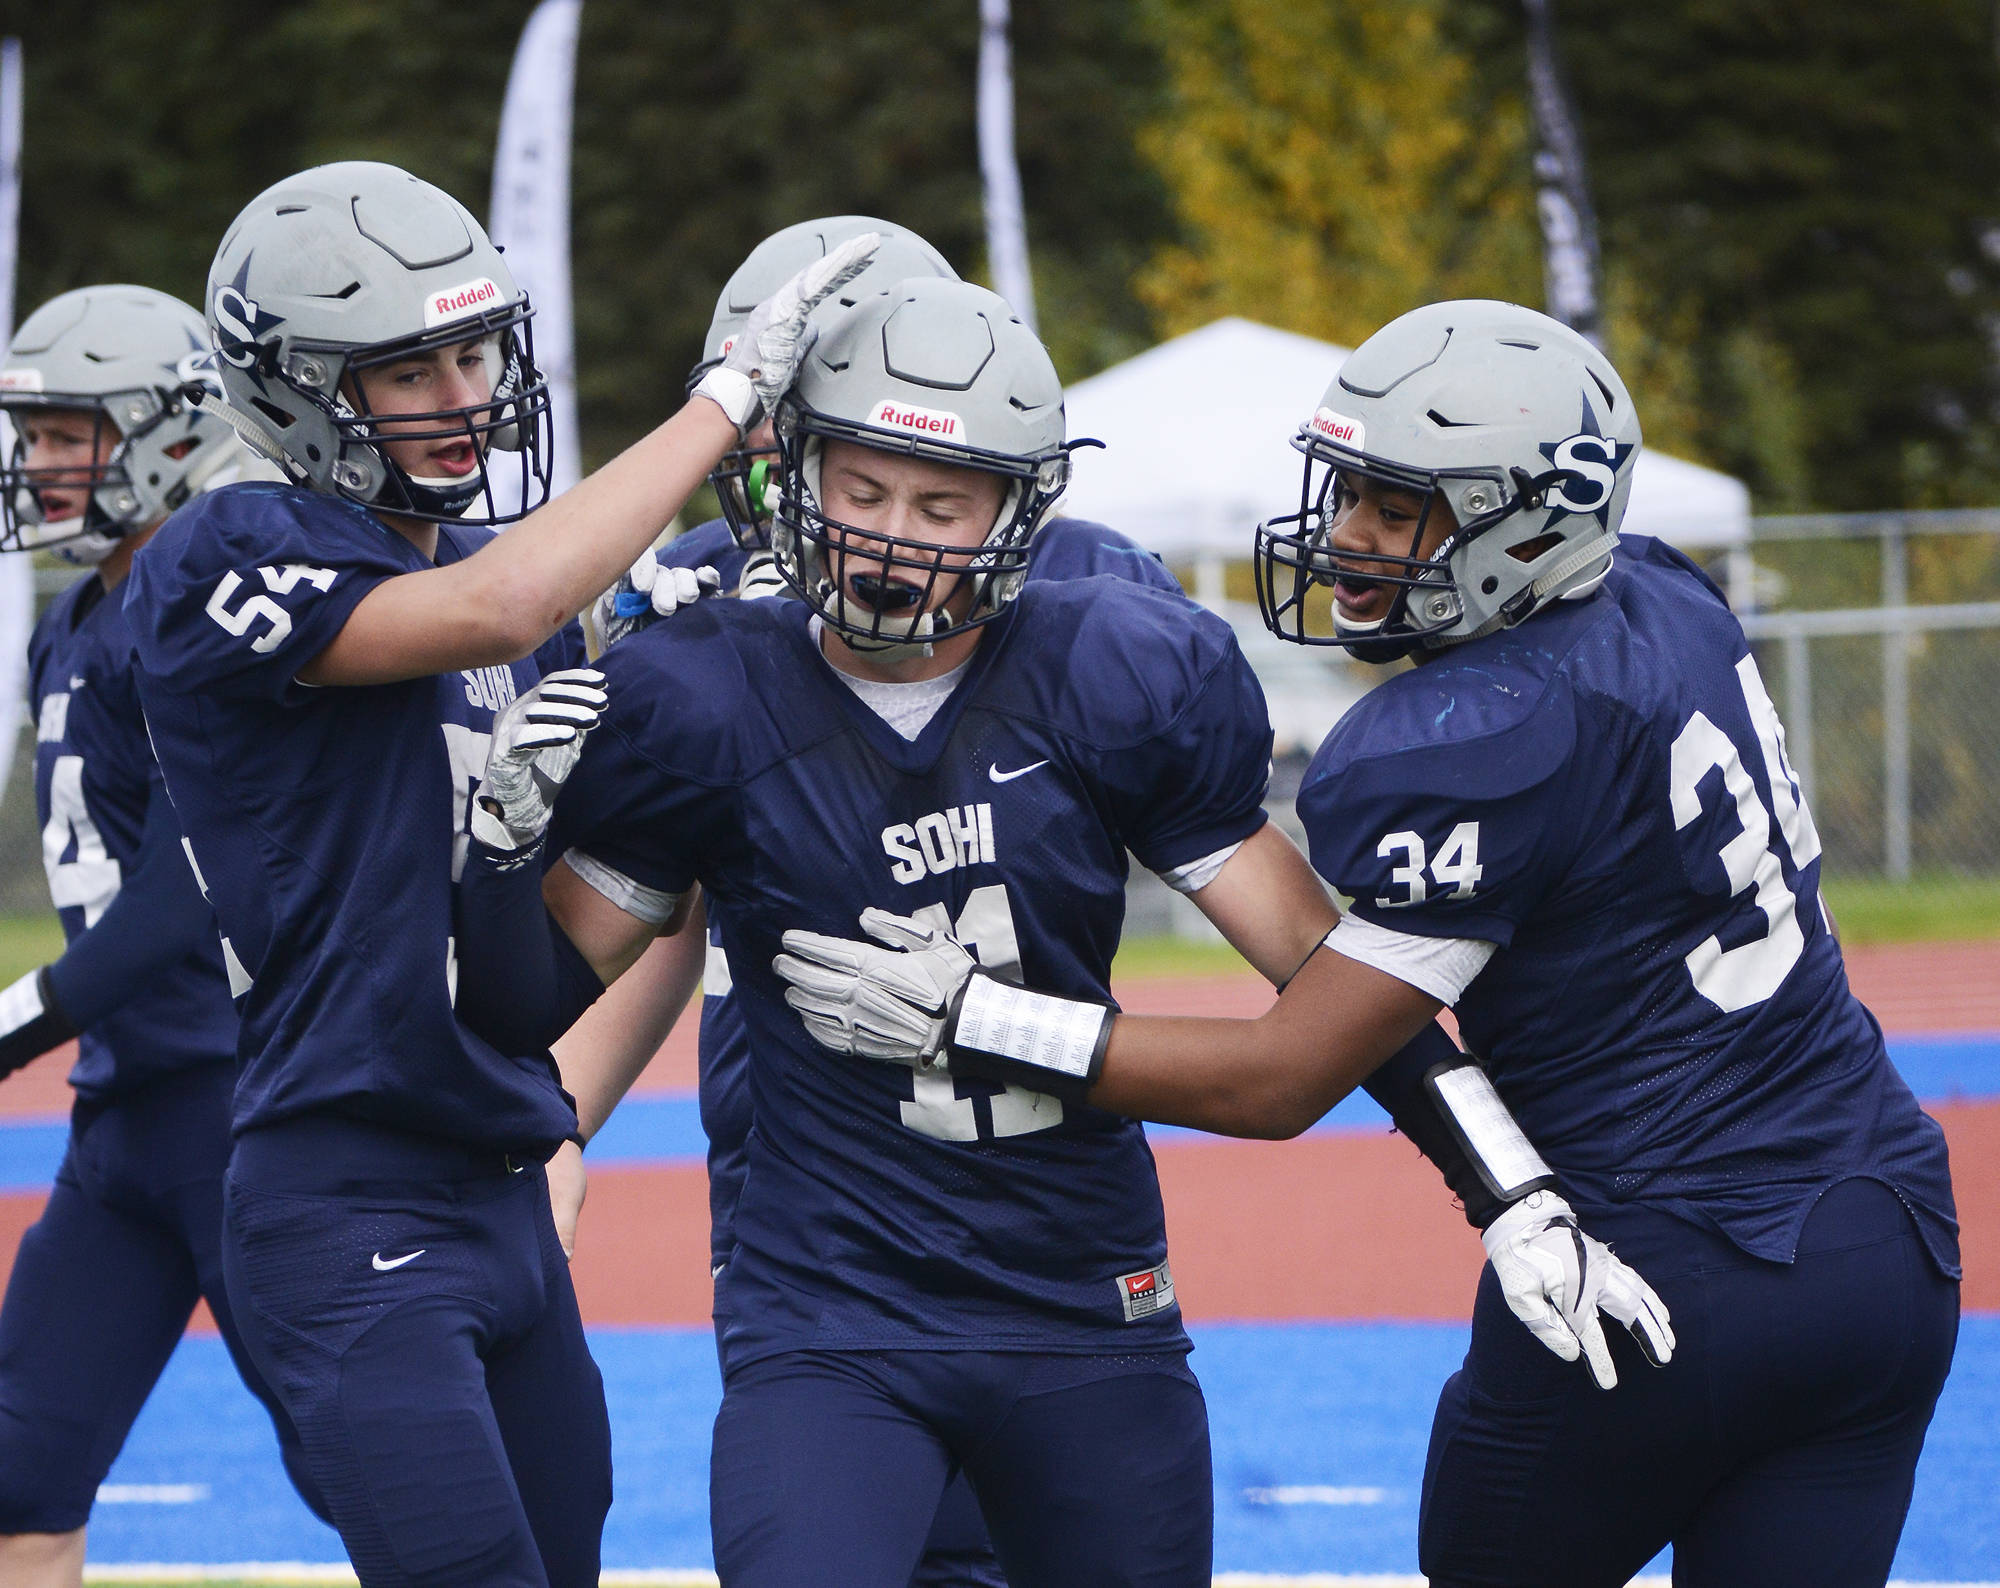 Soldotna running back Brenner Furlong (center) receives congratulations from teammates Zach Hanson (left) and Aaron Faletoi (right) after scoring a touchdown Sept. 16, 2017, at Justin Maile Field in Soldotna. (Photo by Joey Klecka/Peninsula Clarion)